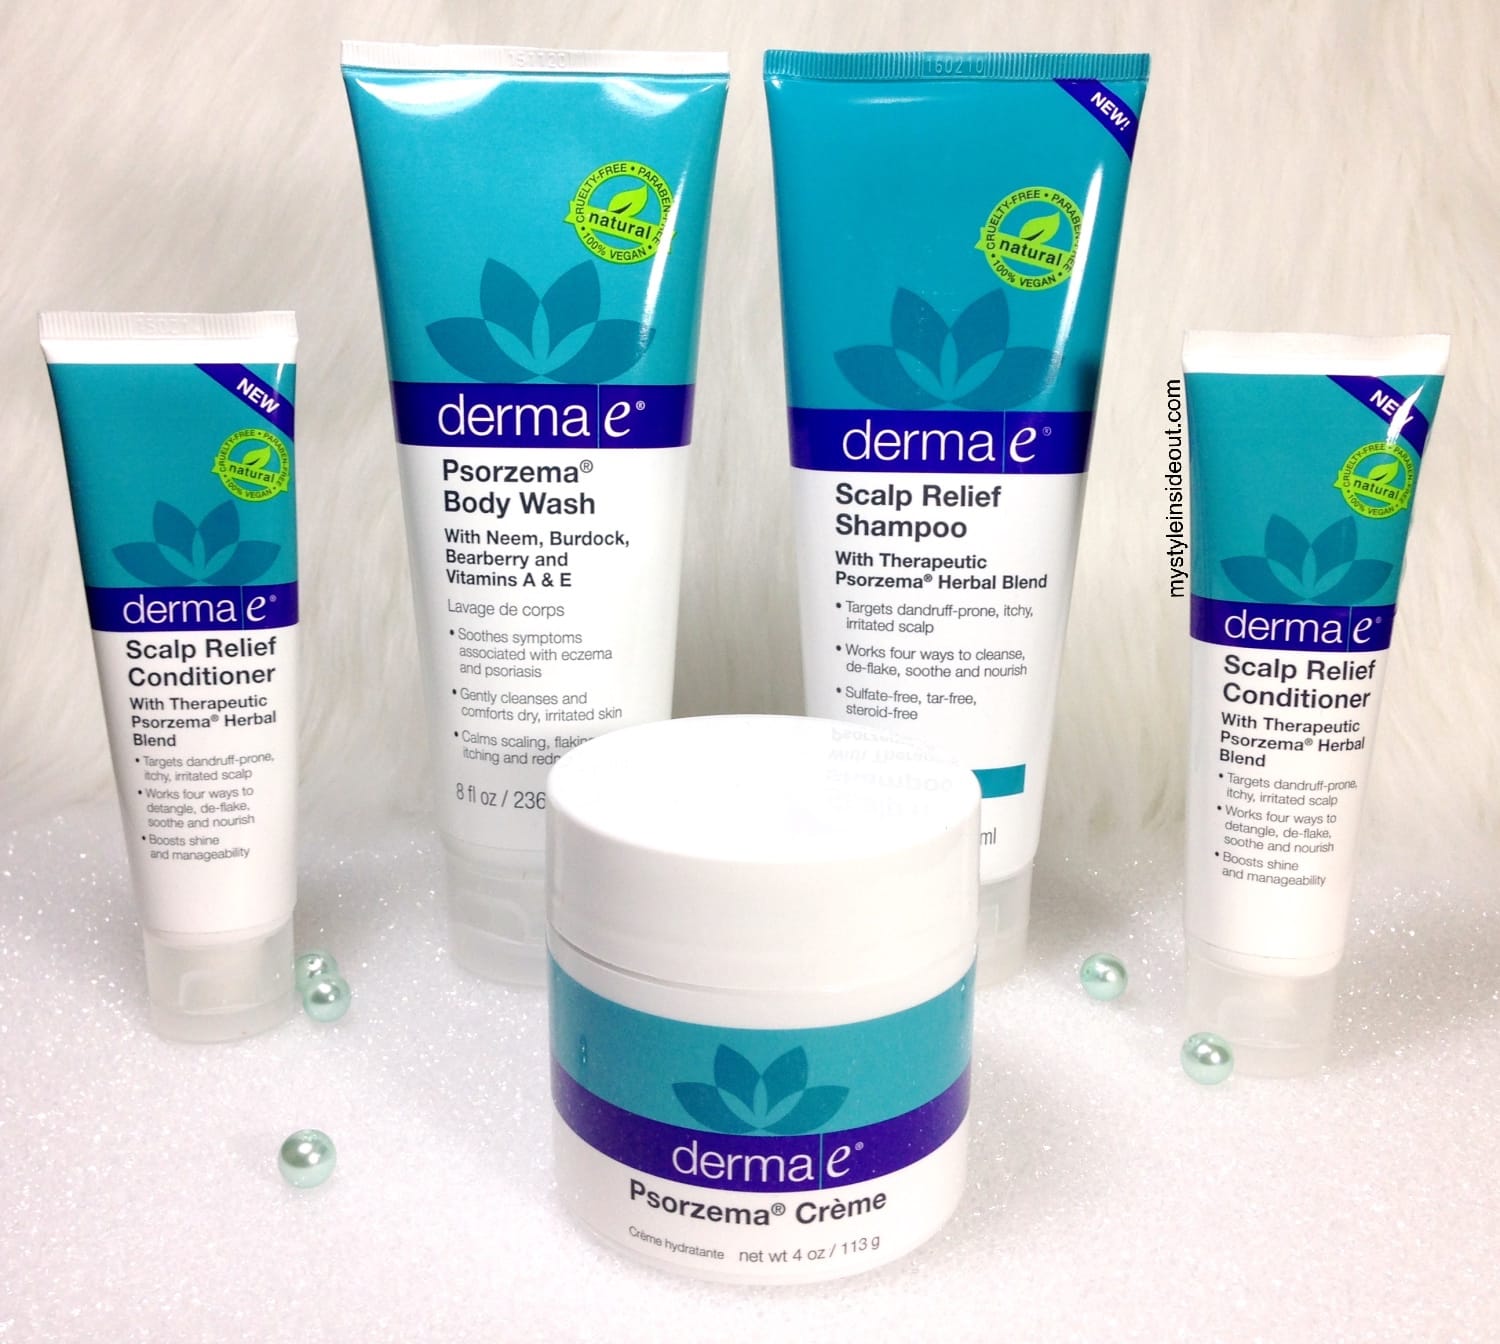 âderma eâ? for Eczema, Psoriasis, and Scalp Issues â MyStyleInsideOut